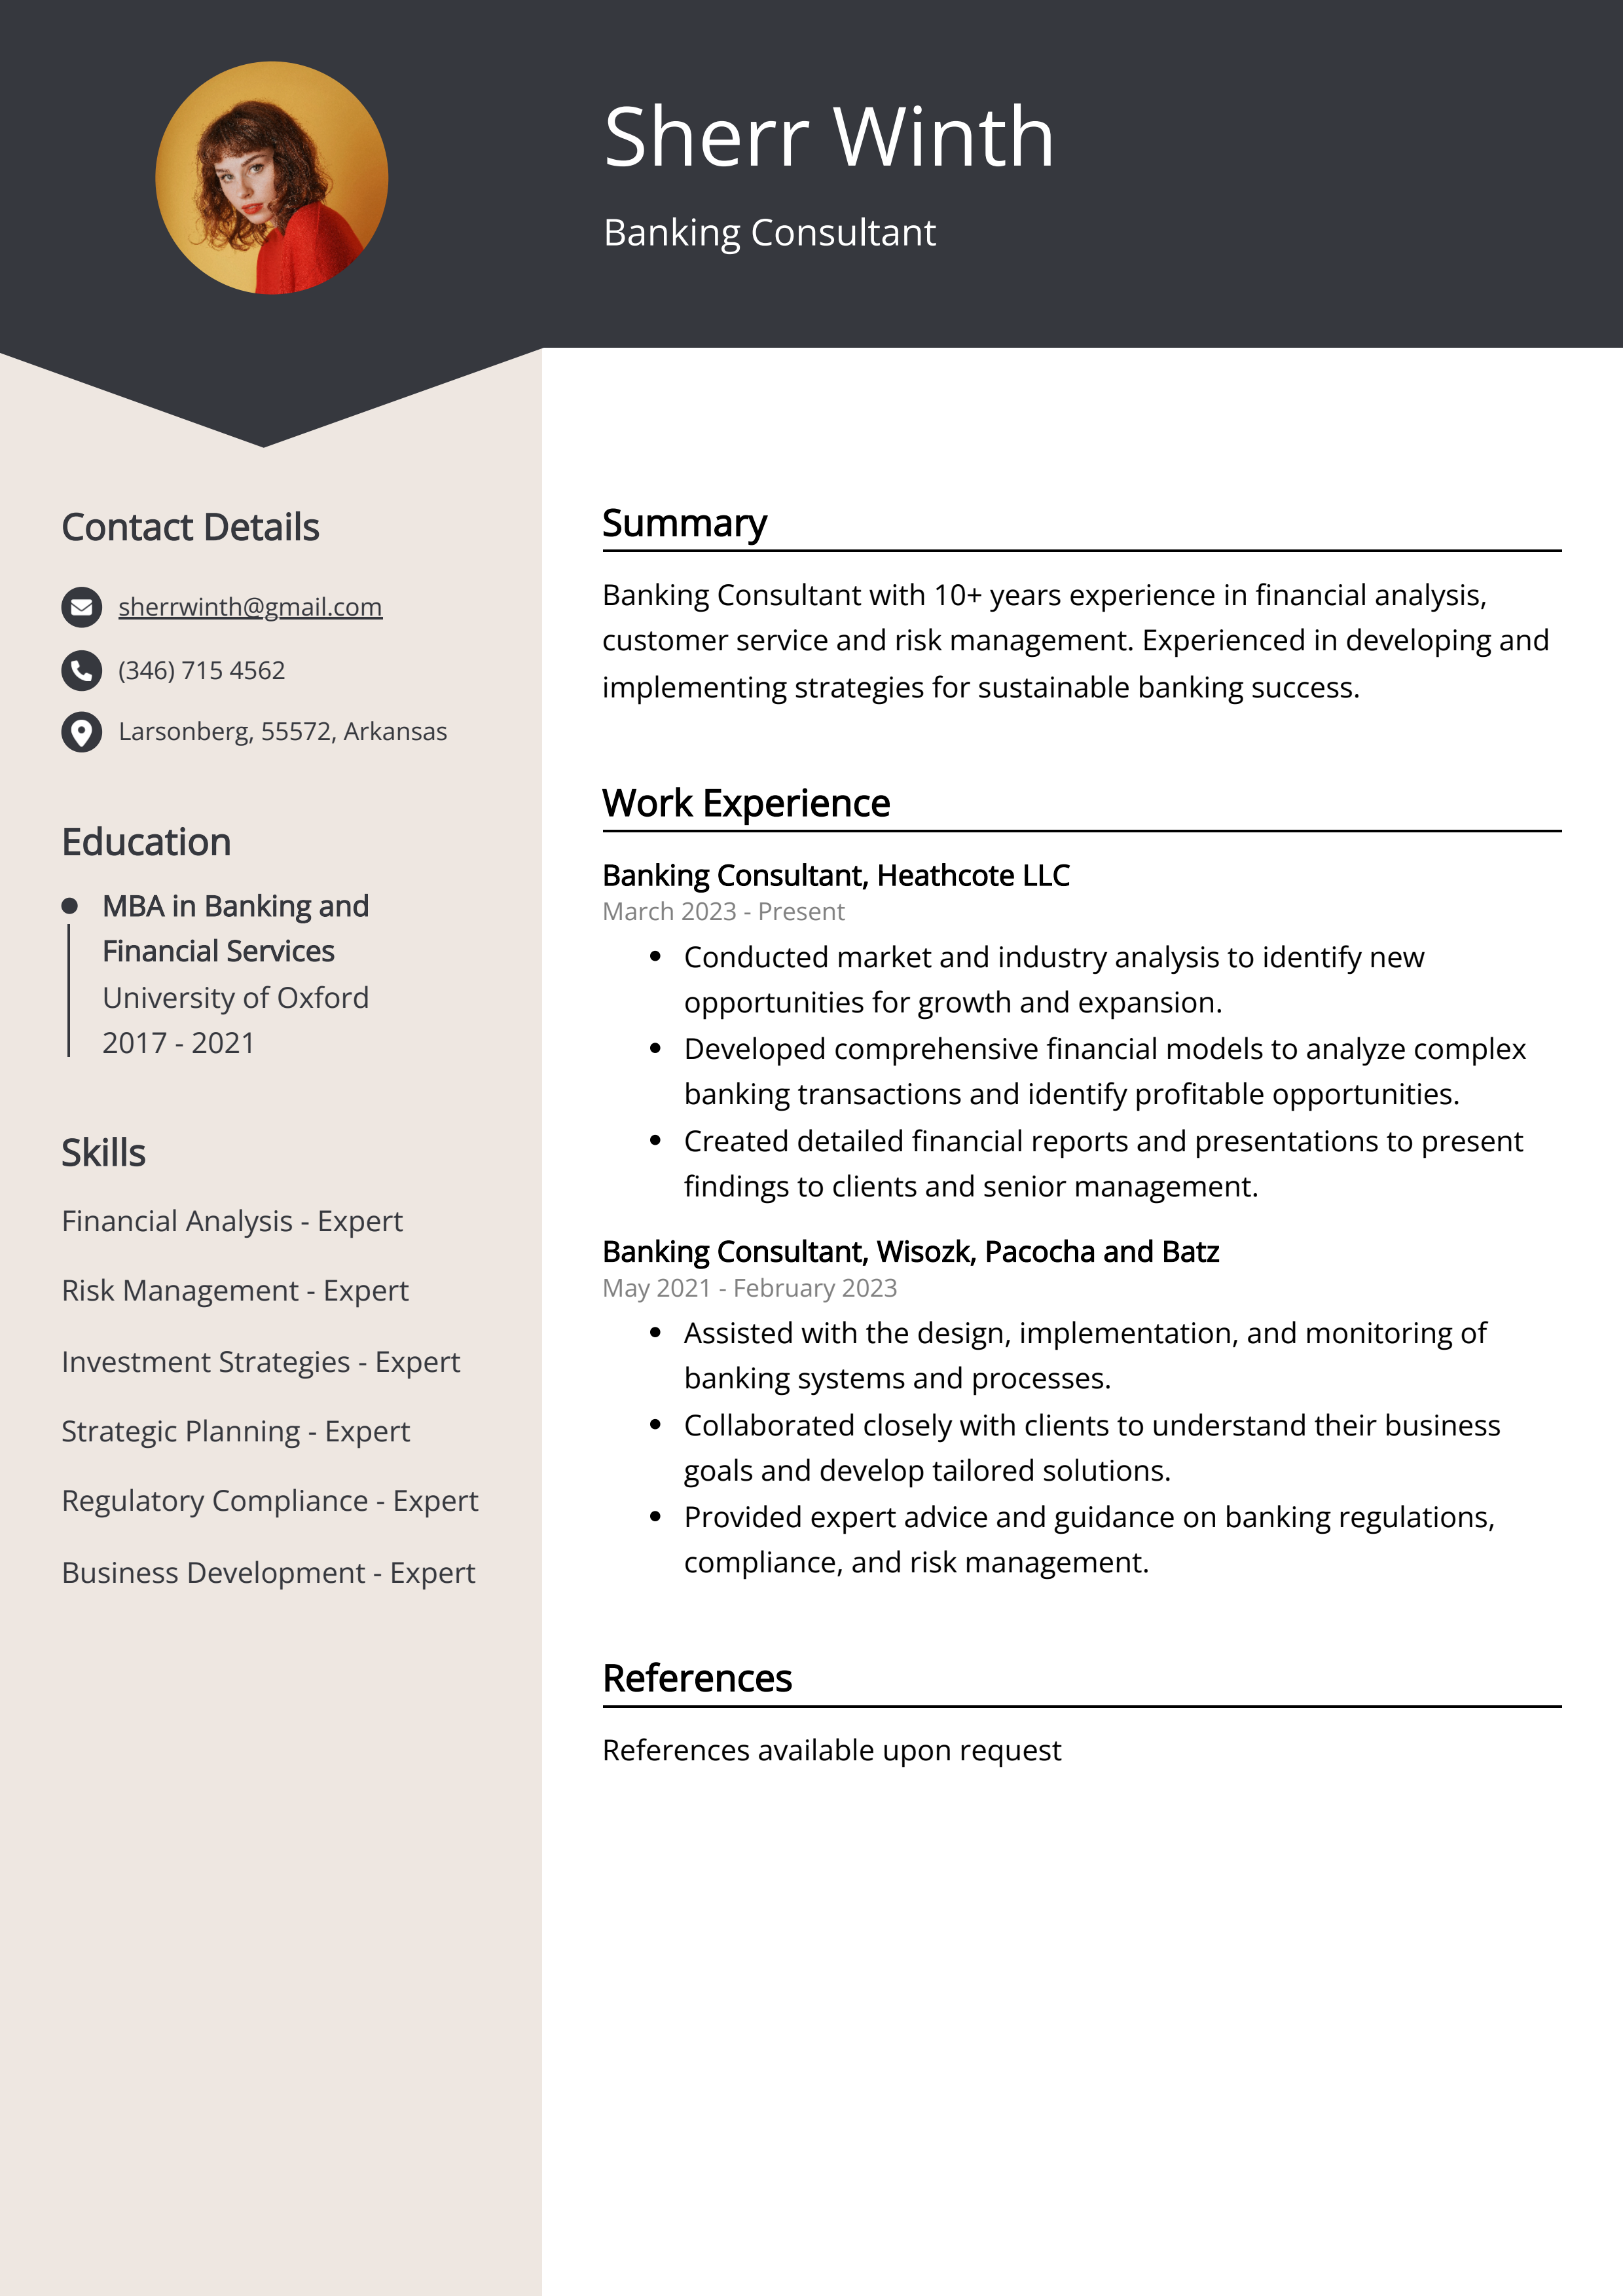 Banking Consultant Resume Example